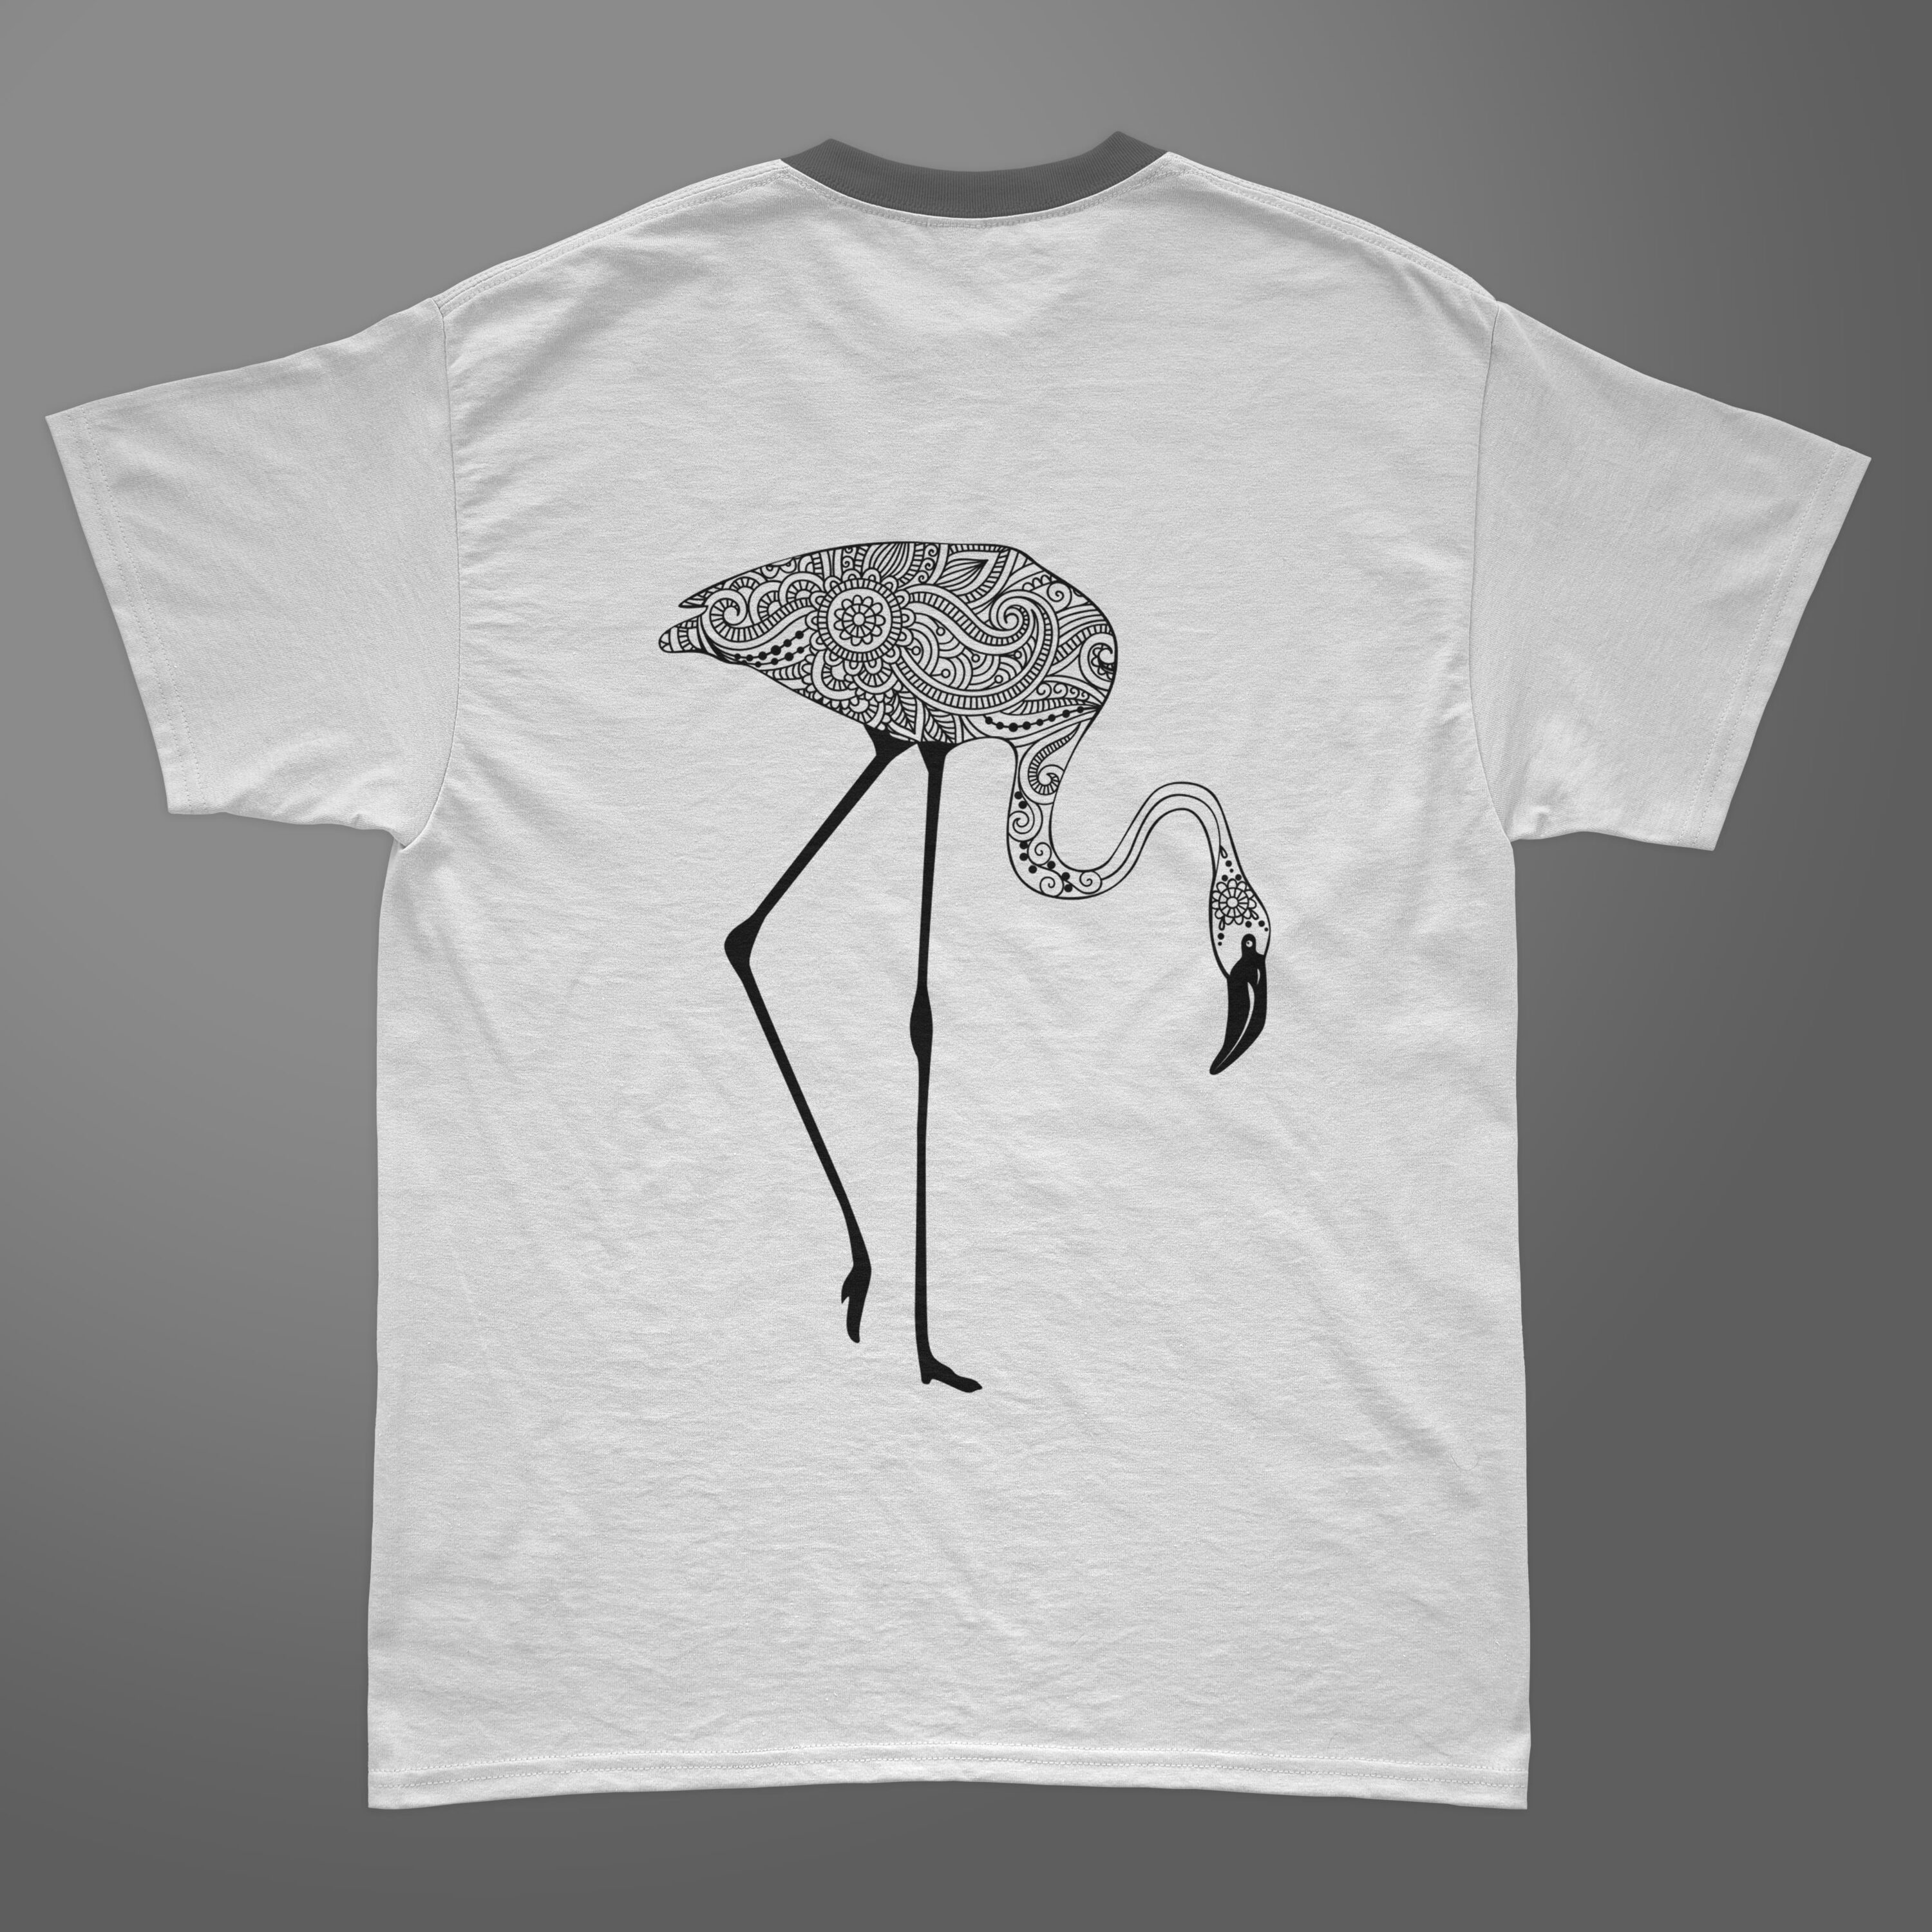 Head flamingo gown on the white t-shirt.